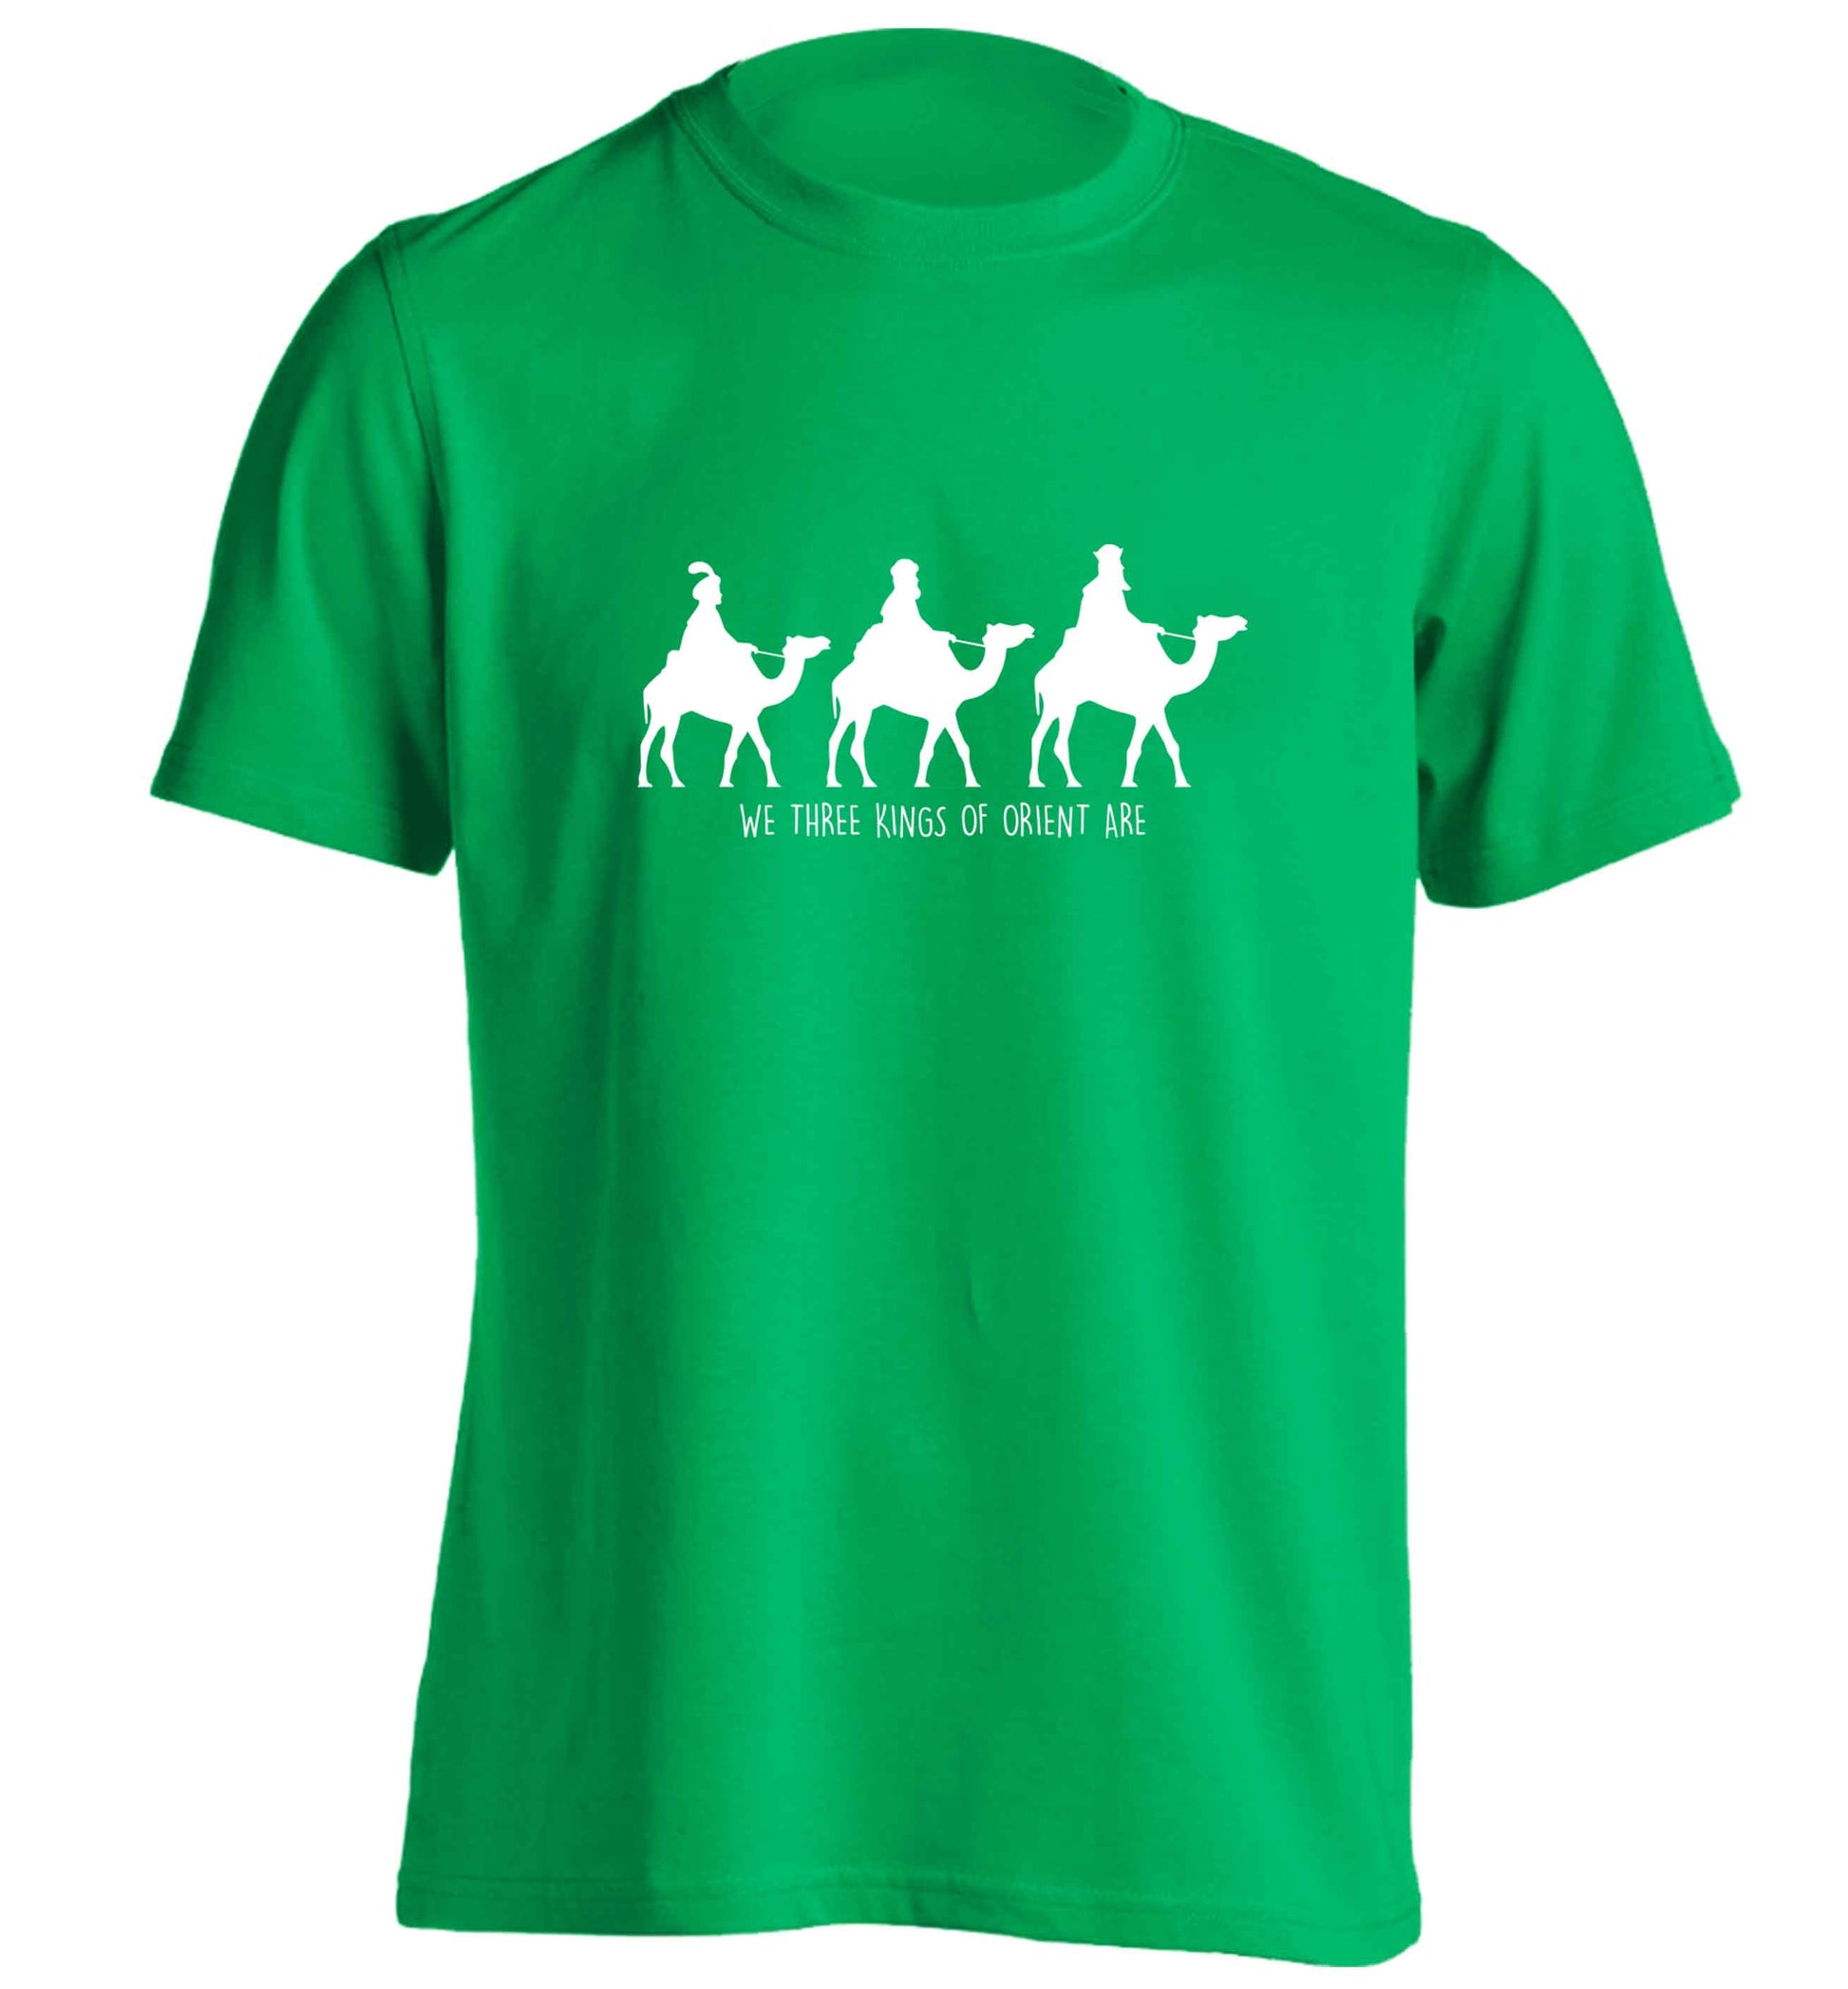 We three kings of orient are adults unisex green Tshirt 2XL